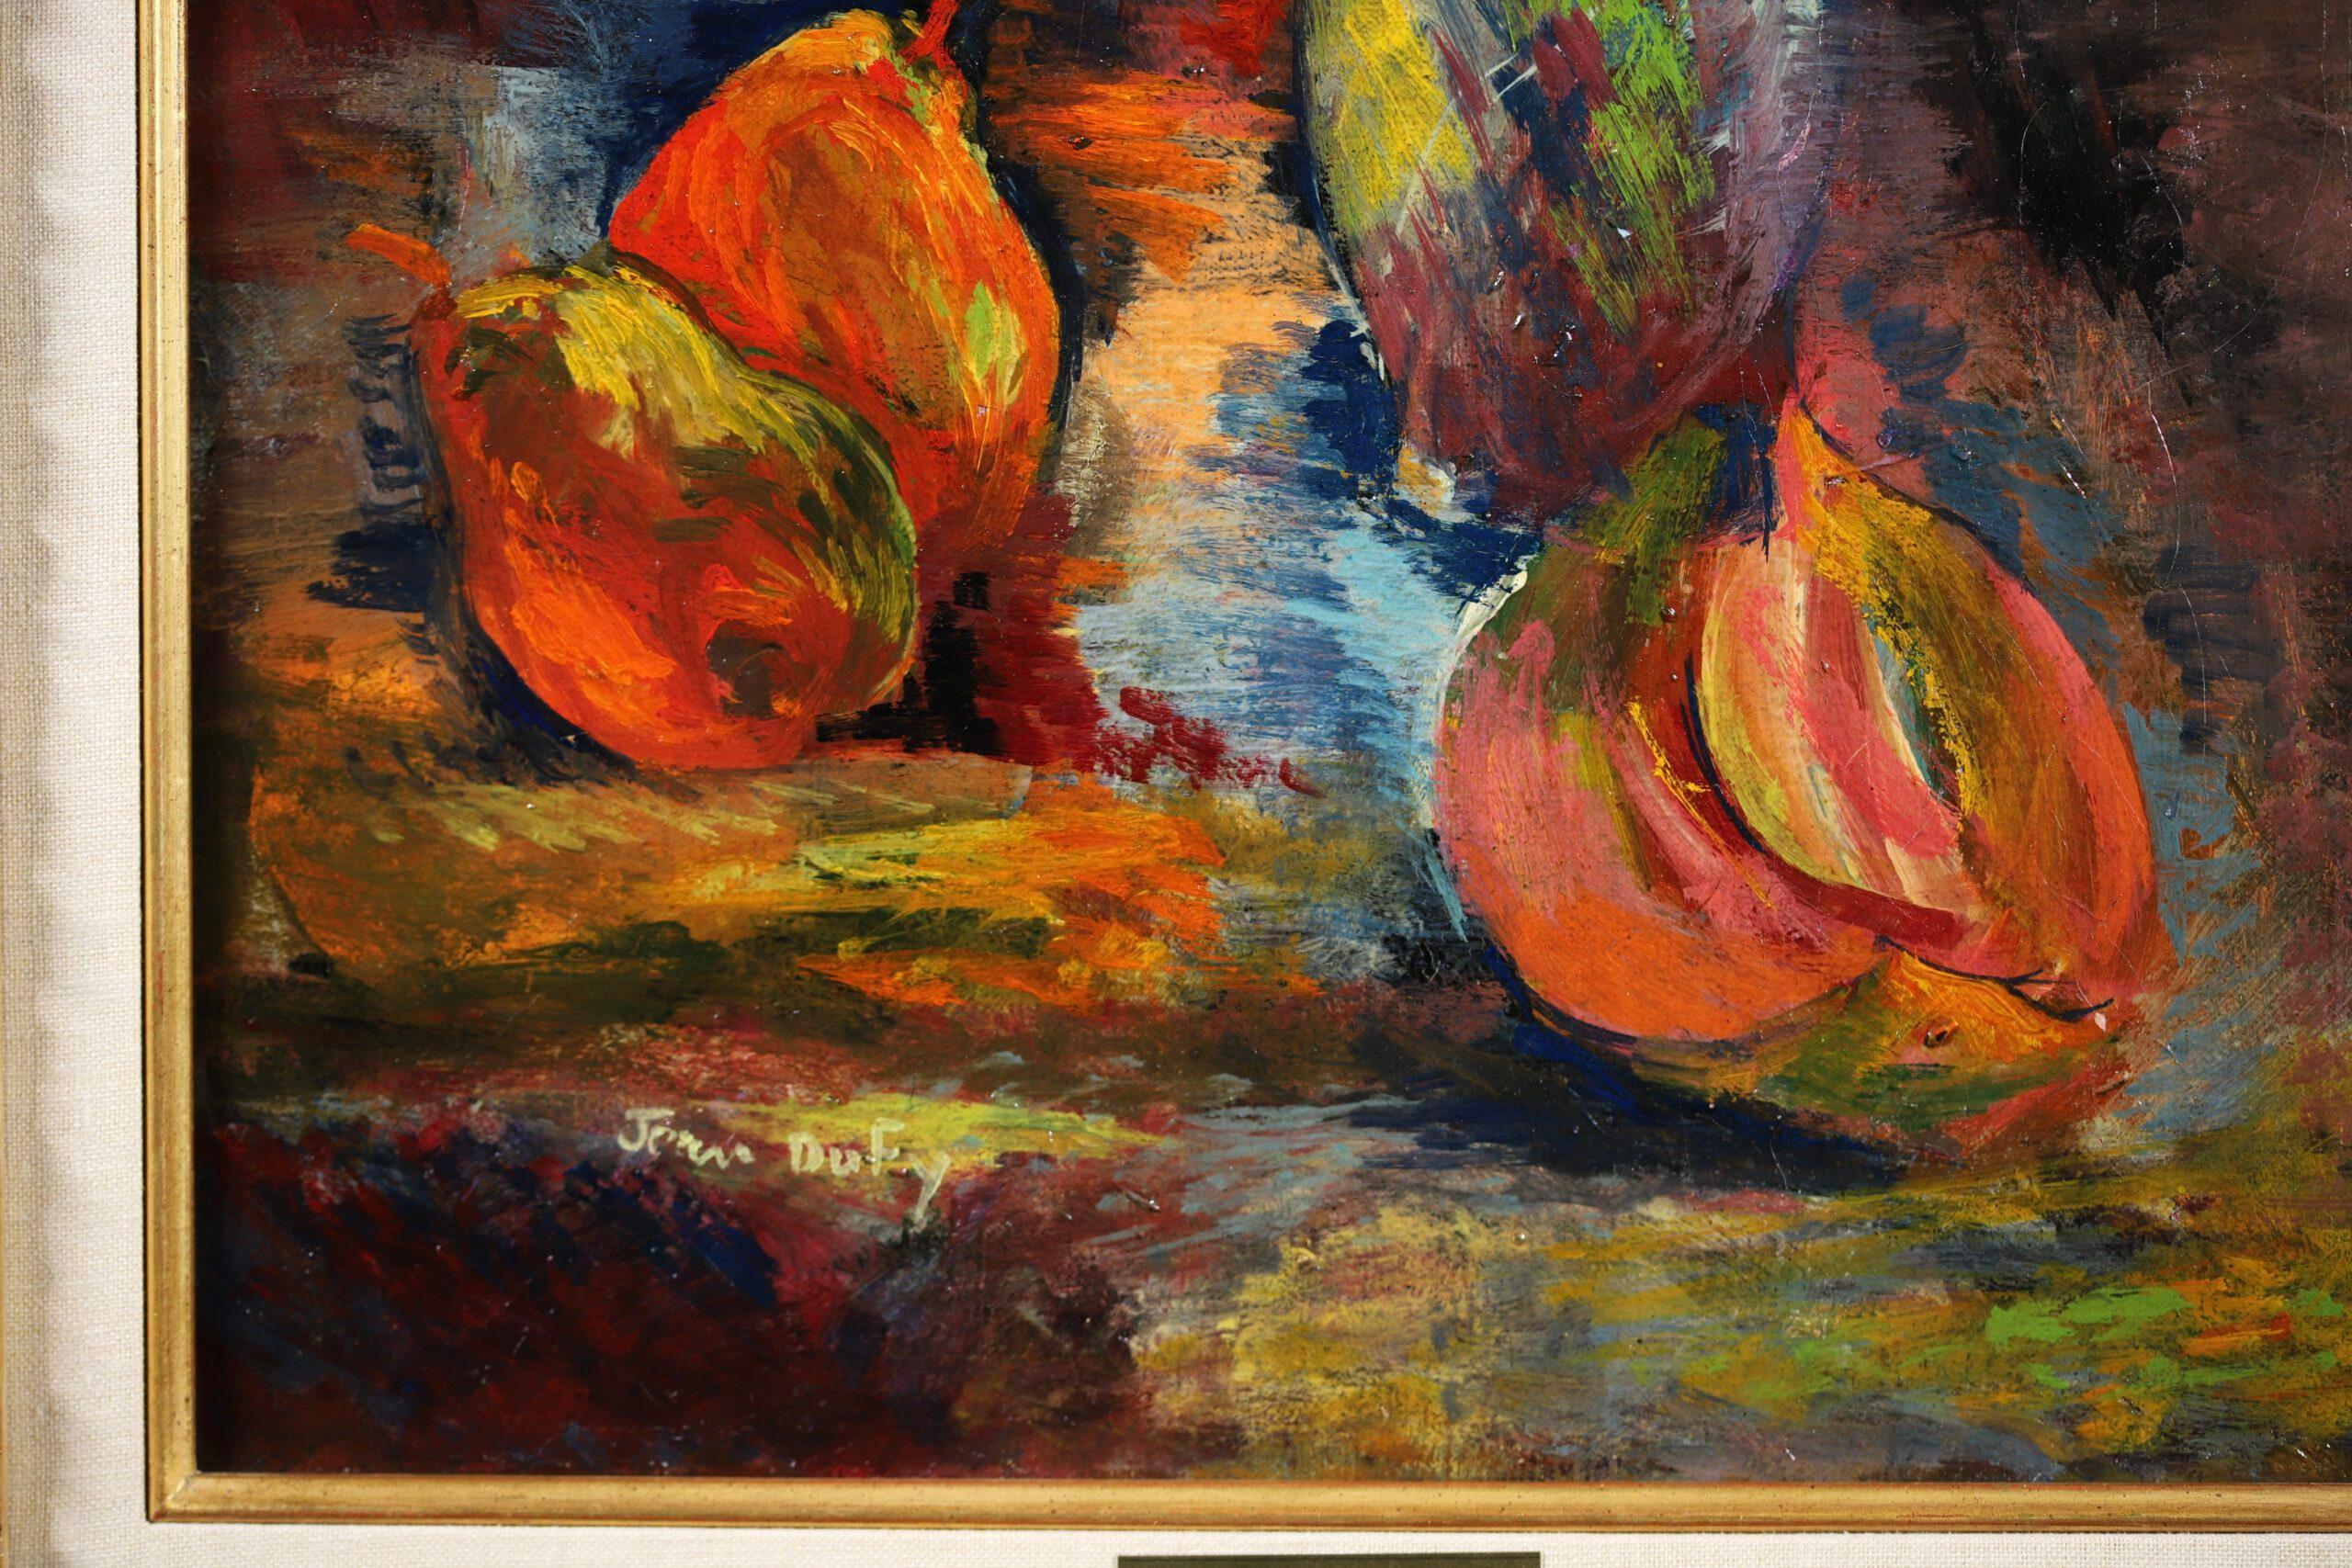 Fleurs et Fruits - Post Impressionist Still Life Oil Painting by Jean Dufy For Sale 5